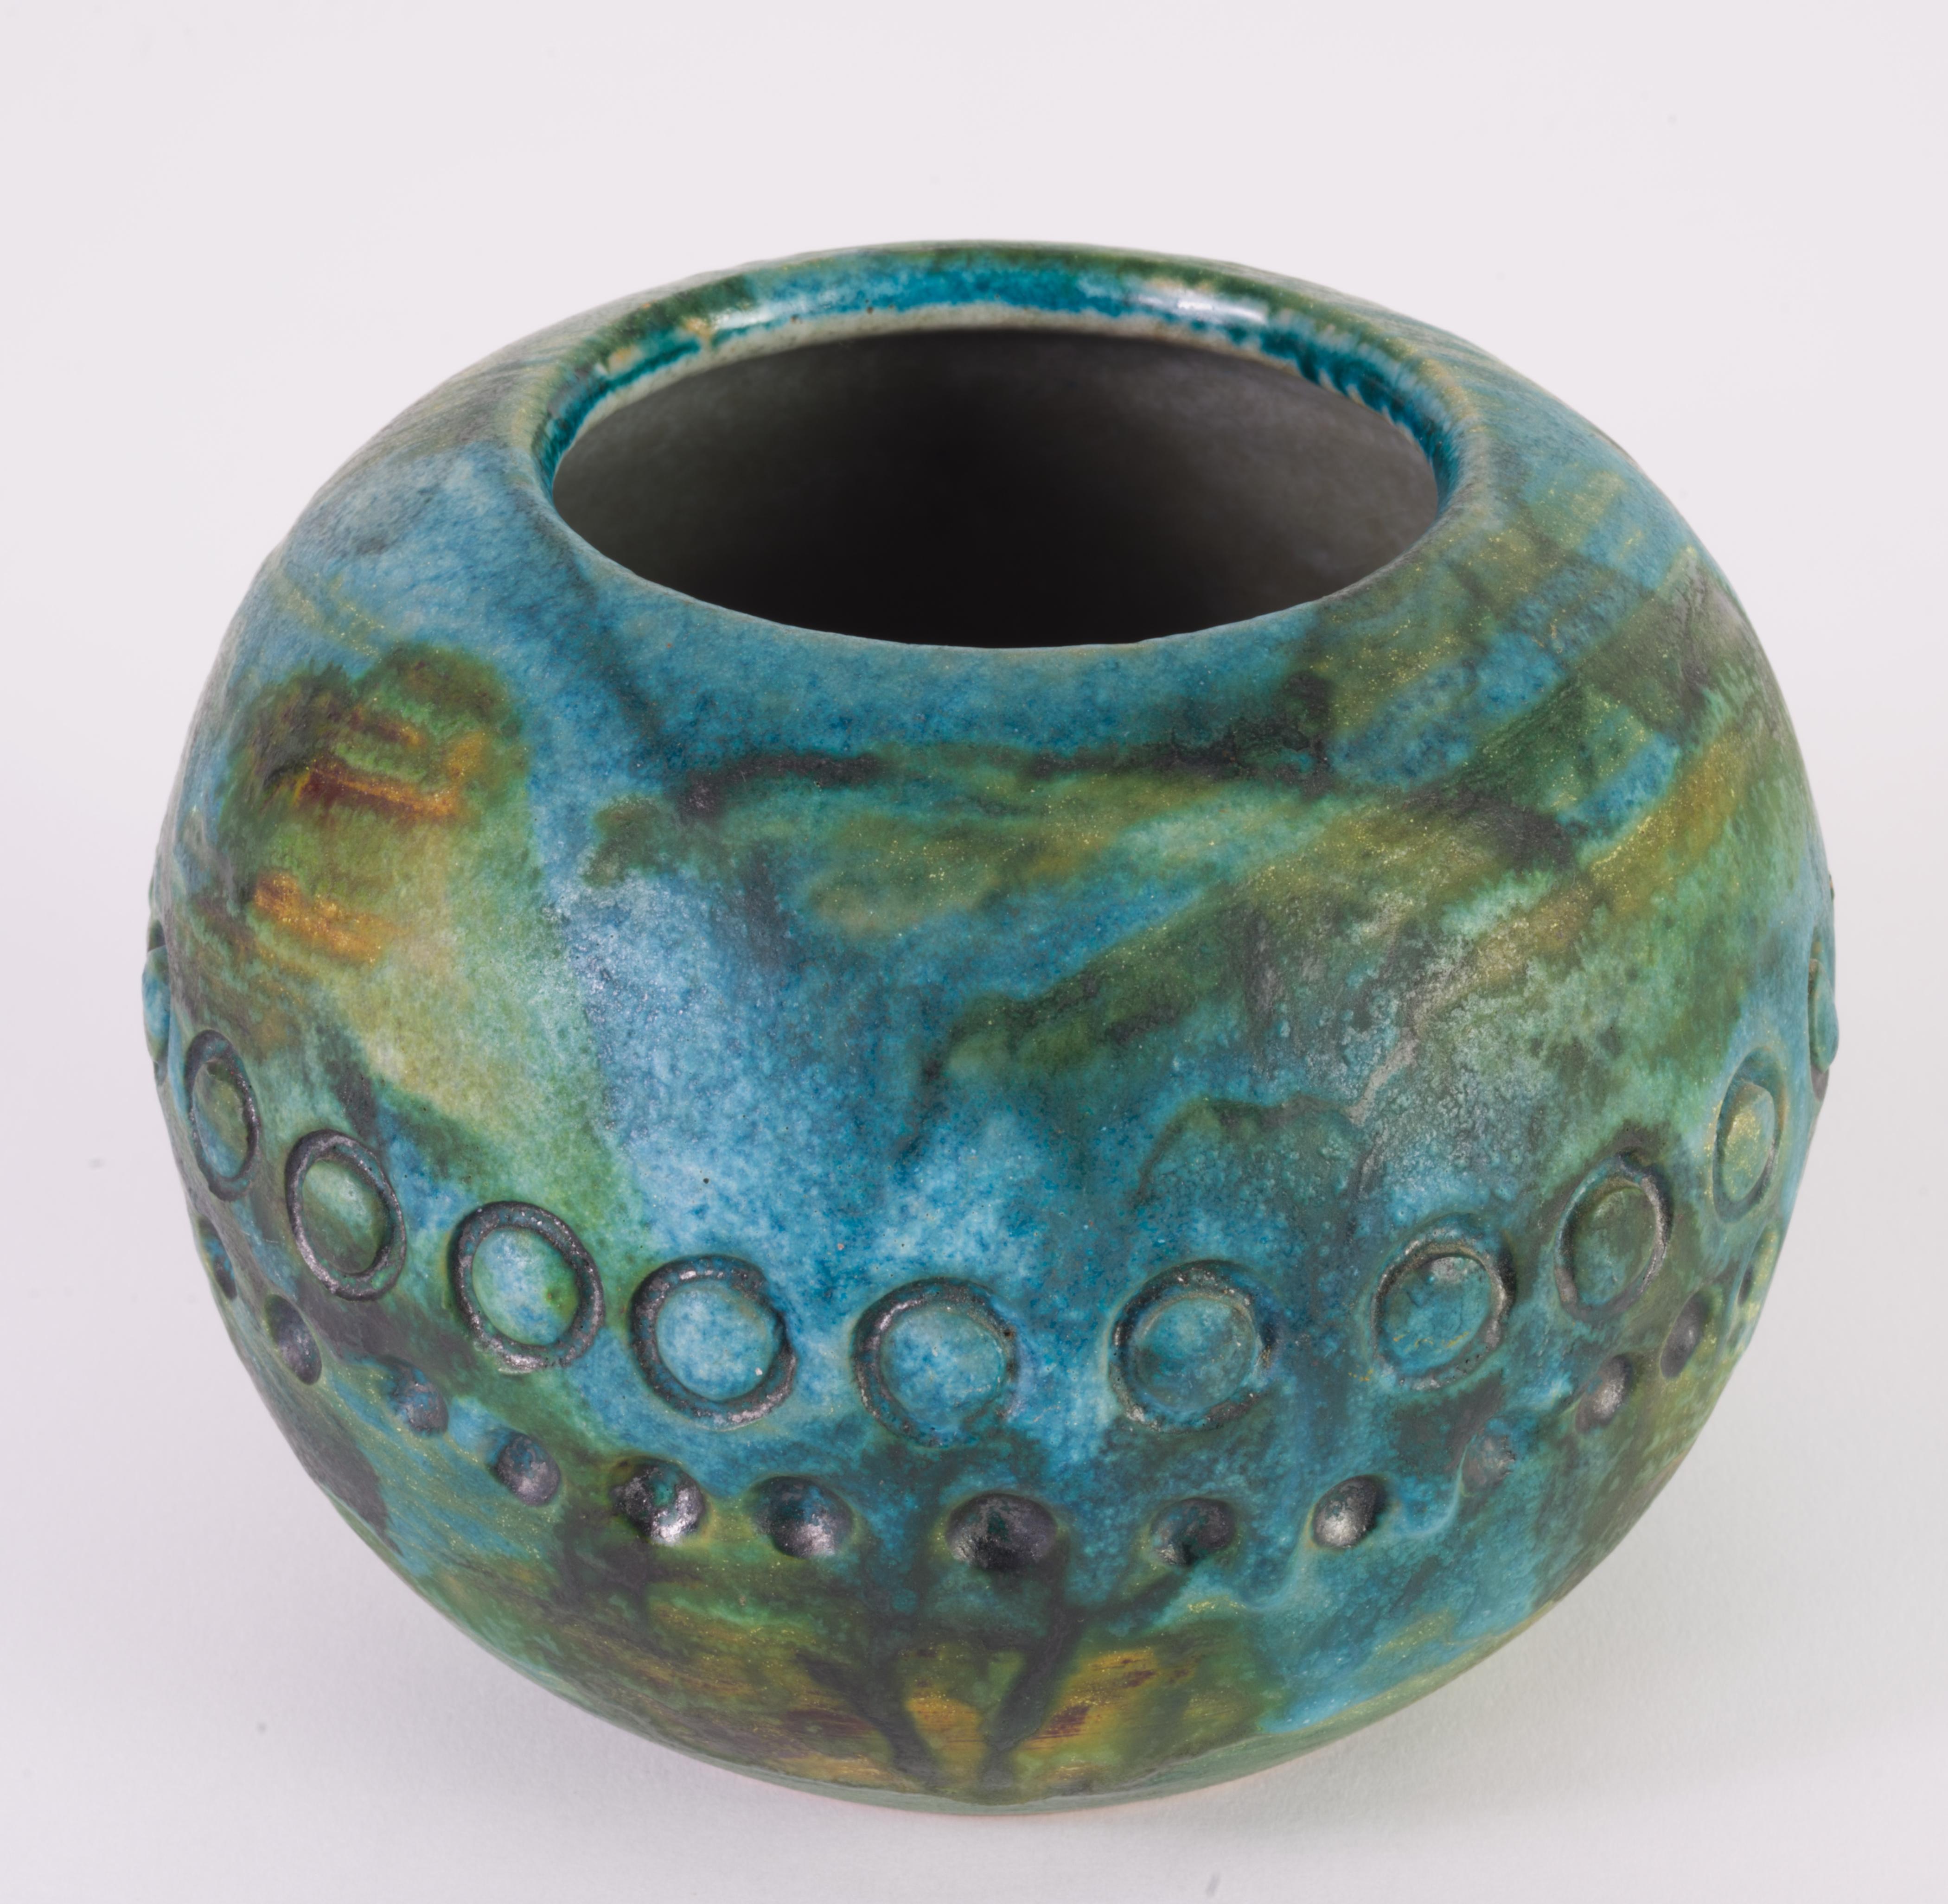  Vase or vessel was made by Alvino Bagni for Raymor as a part of his Sea Garden series. Sea Garden series includes vases, ashtrays, lamps, and other decor items done in complex turquoise glaze with shades of blue, green, yellow, and brown and